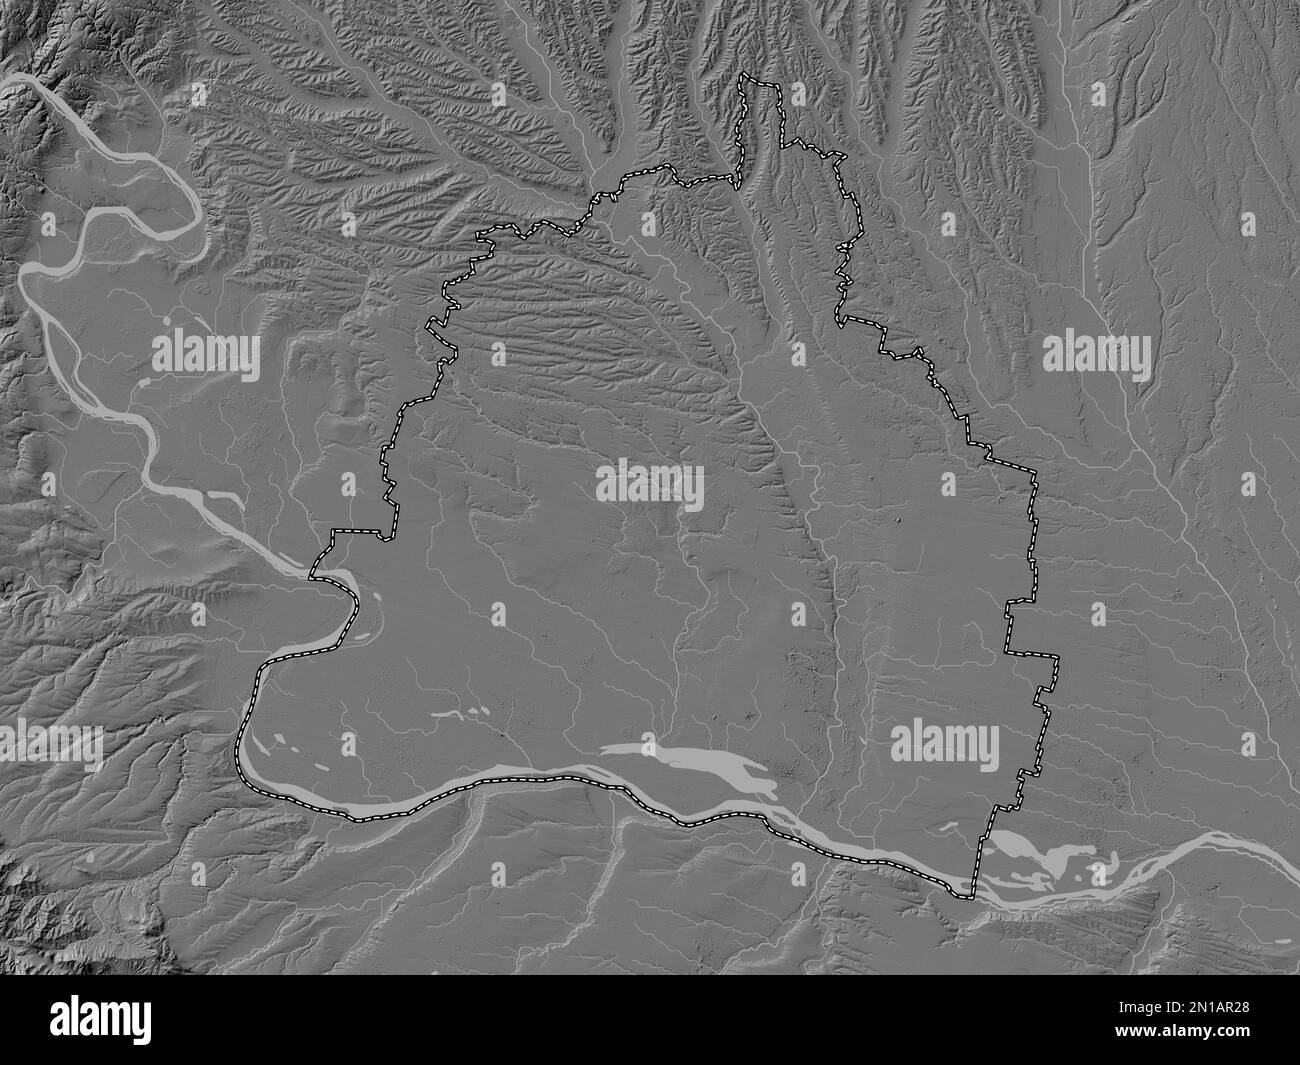 Dolj, county of Romania. Bilevel elevation map with lakes and rivers Stock Photo